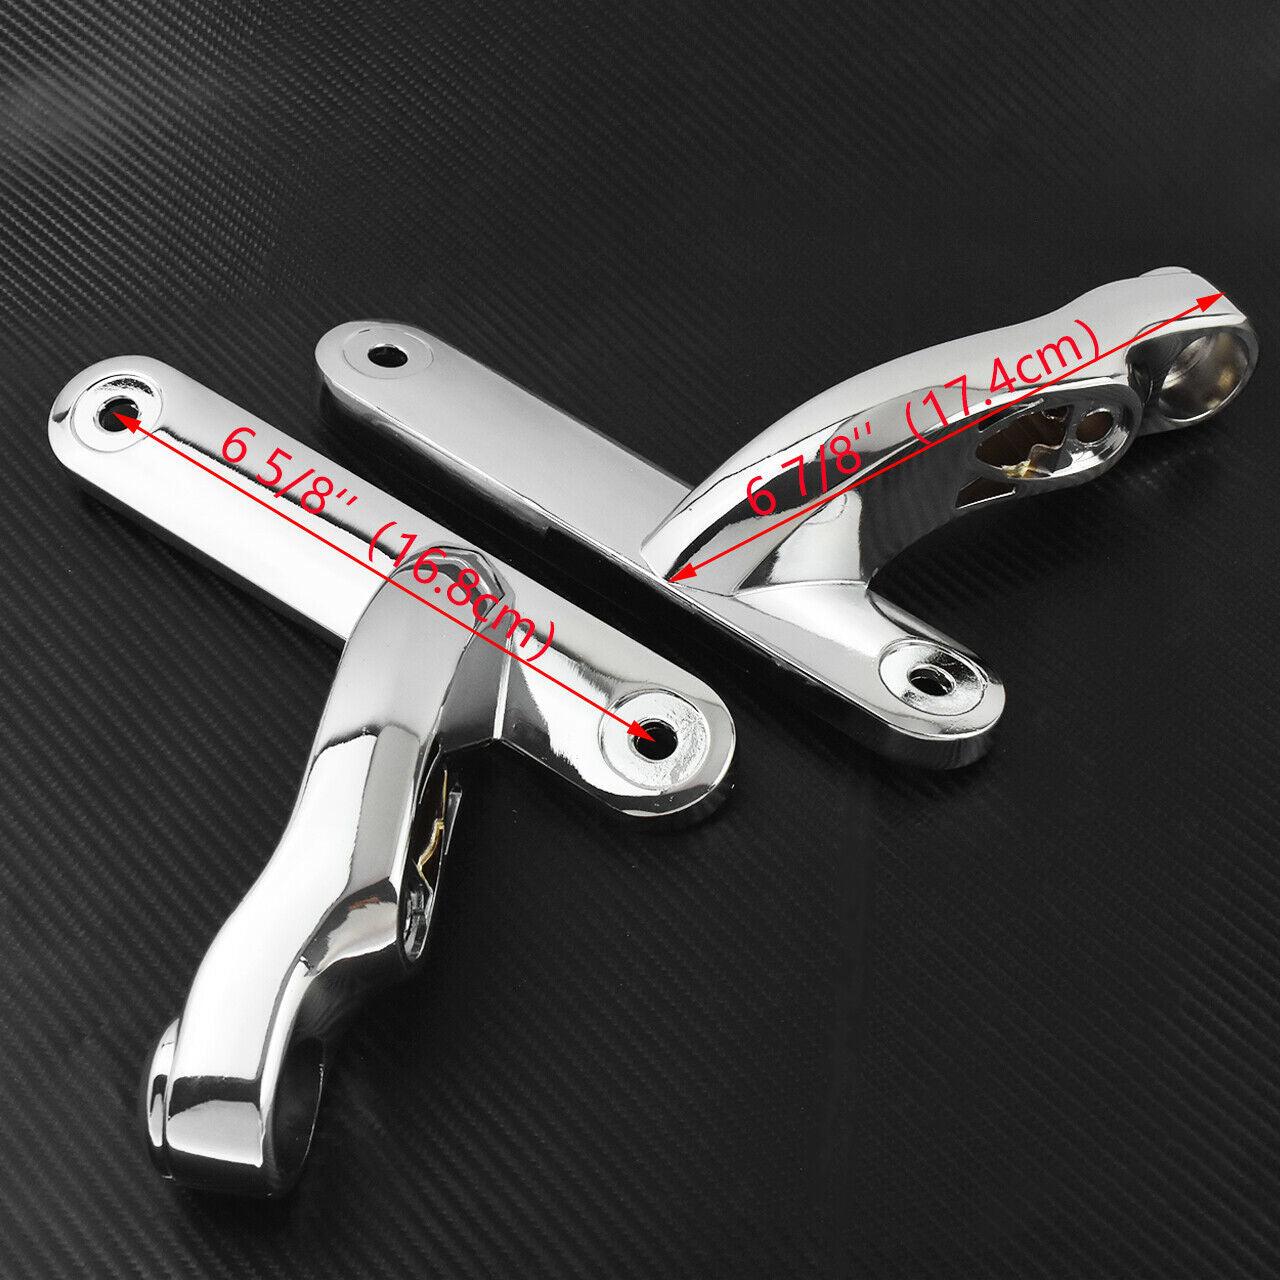 Chrome Auxiliary Lighting Brackets Fit For Harley Touring Softail Dyna 1997-2016 - Moto Life Products